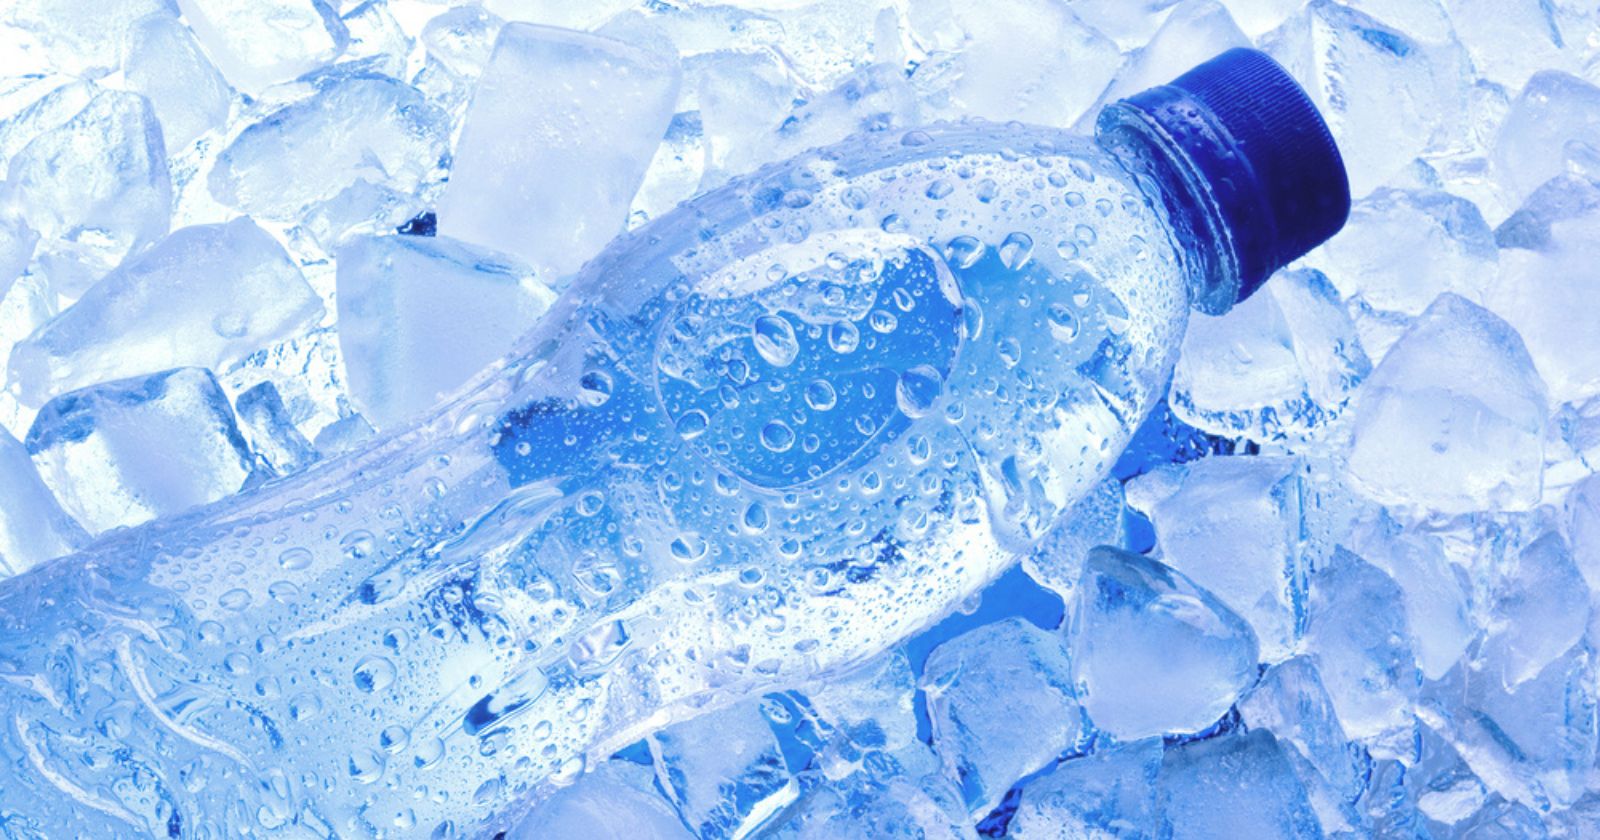 Heat wave: how to cool a bottle of water without a fridge?